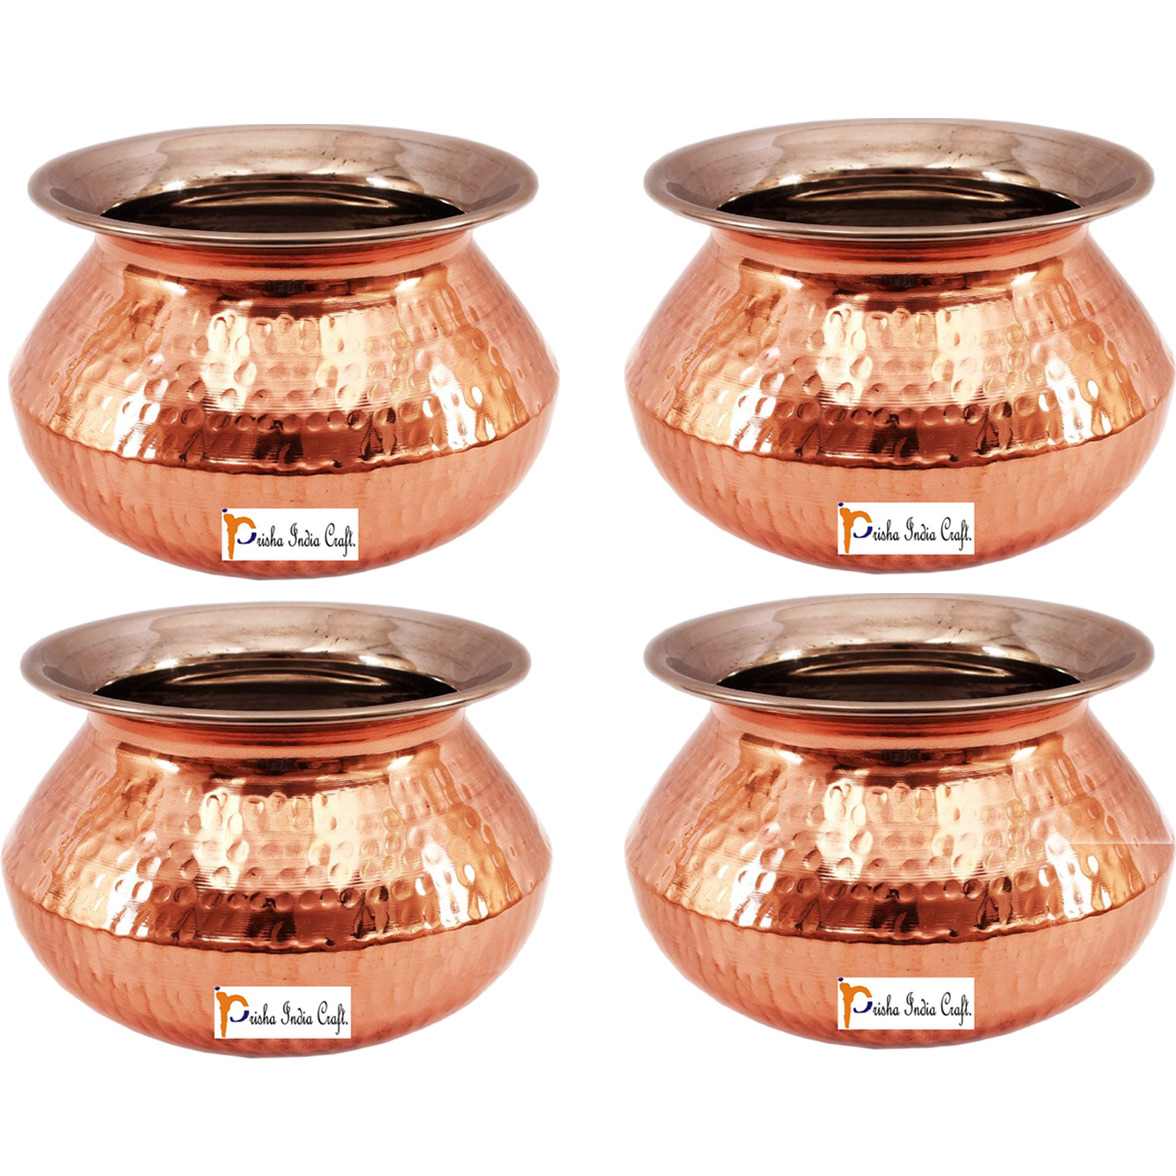 Set of 4 Prisha India Craft B. High Quality Handmade Steel Copper Casserole and Serving Spoon - Set of Copper Handi and Serving Spoon - Copper Bowl Dia - 6.5  X Height - 4.50  - Christmas Gift